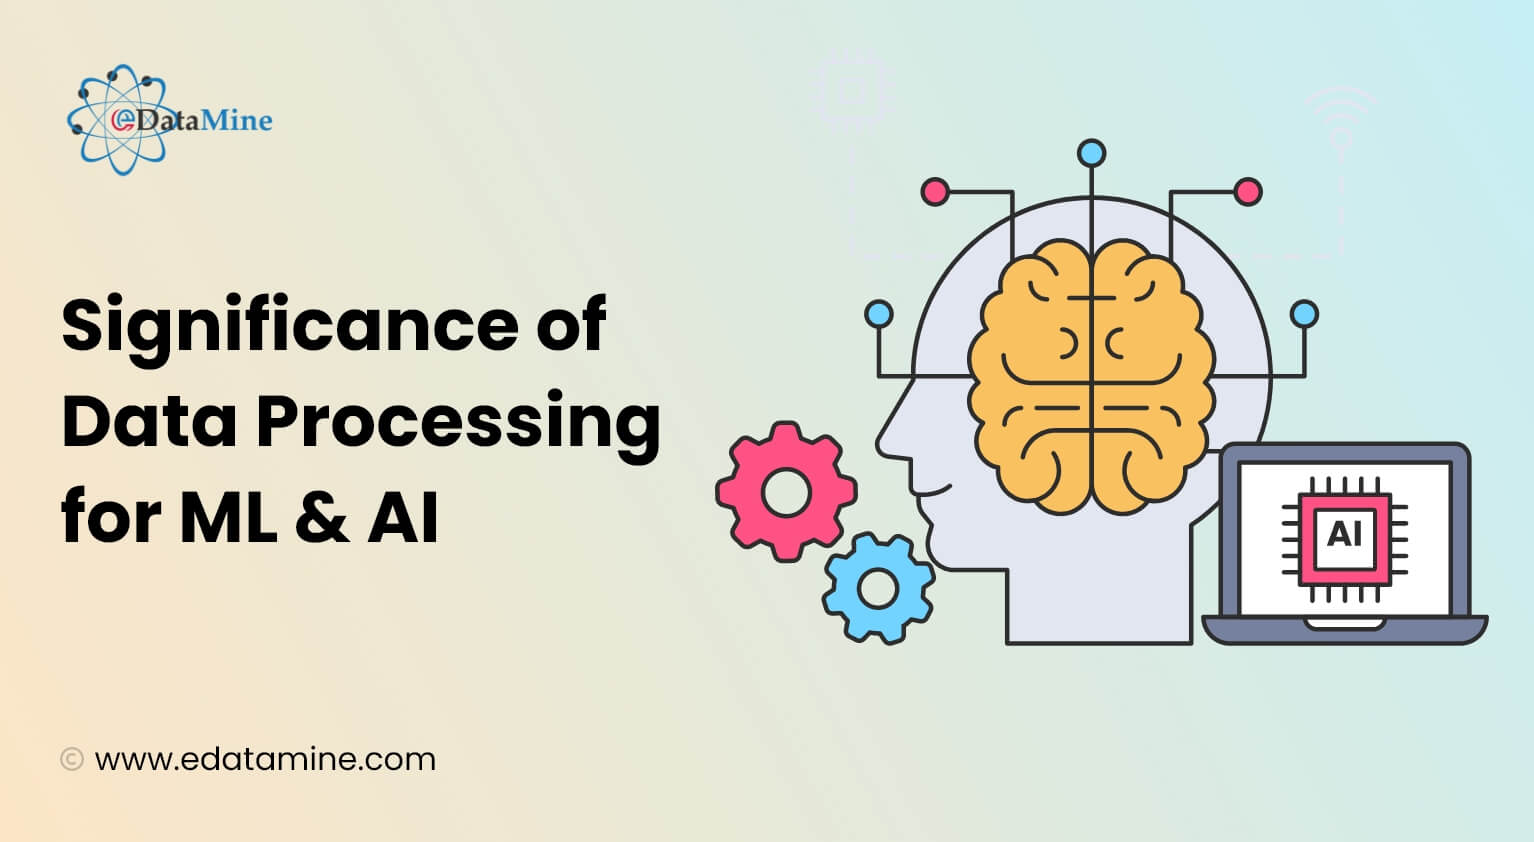 Significance of Data Processing for ML & AI